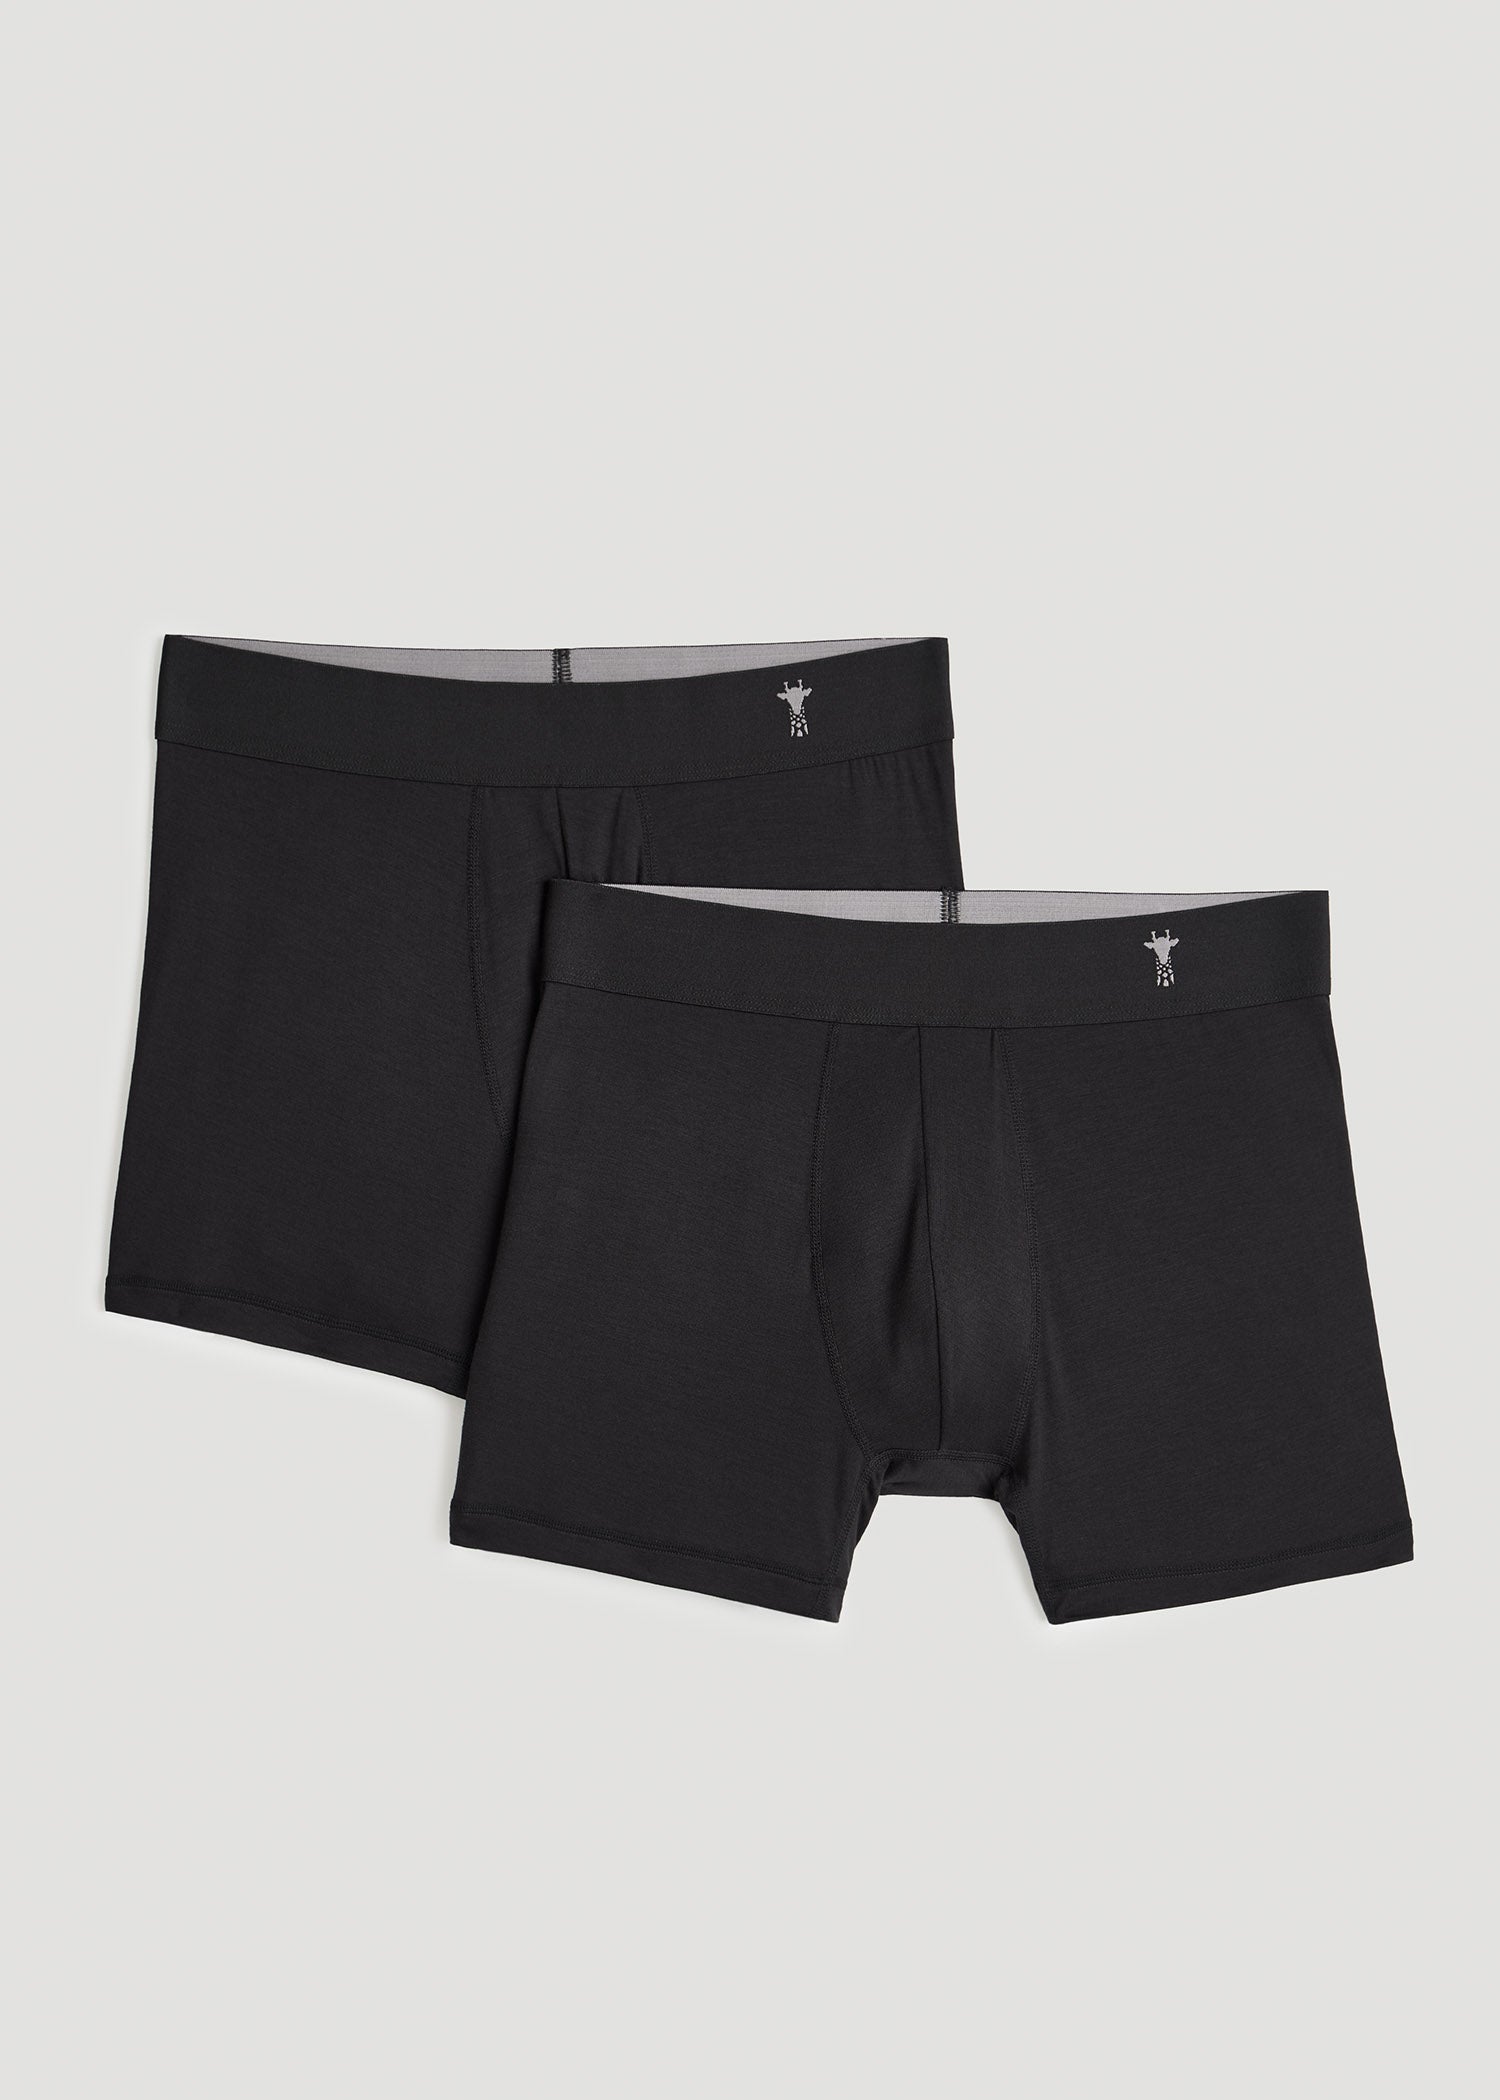 A-dam Boxer shorts to enjoy the ride. Made from organic cotton.